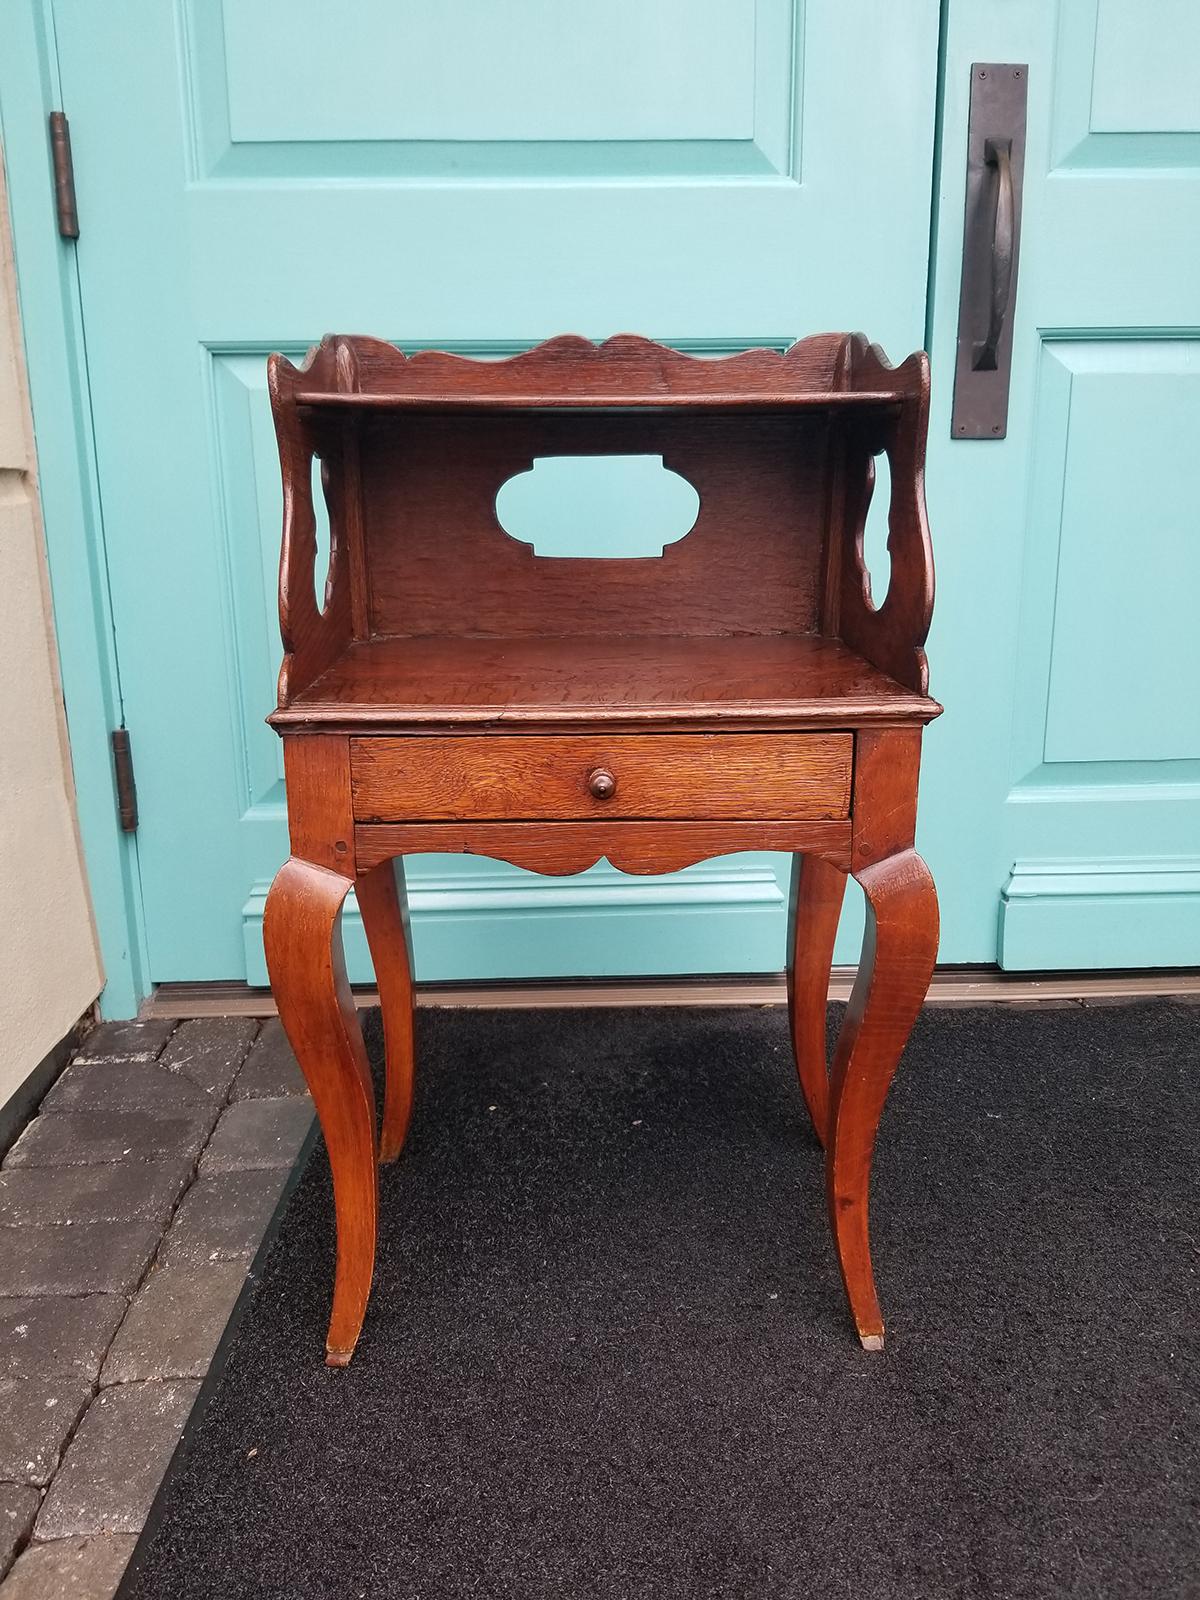 19th century French oak side table with drawer.